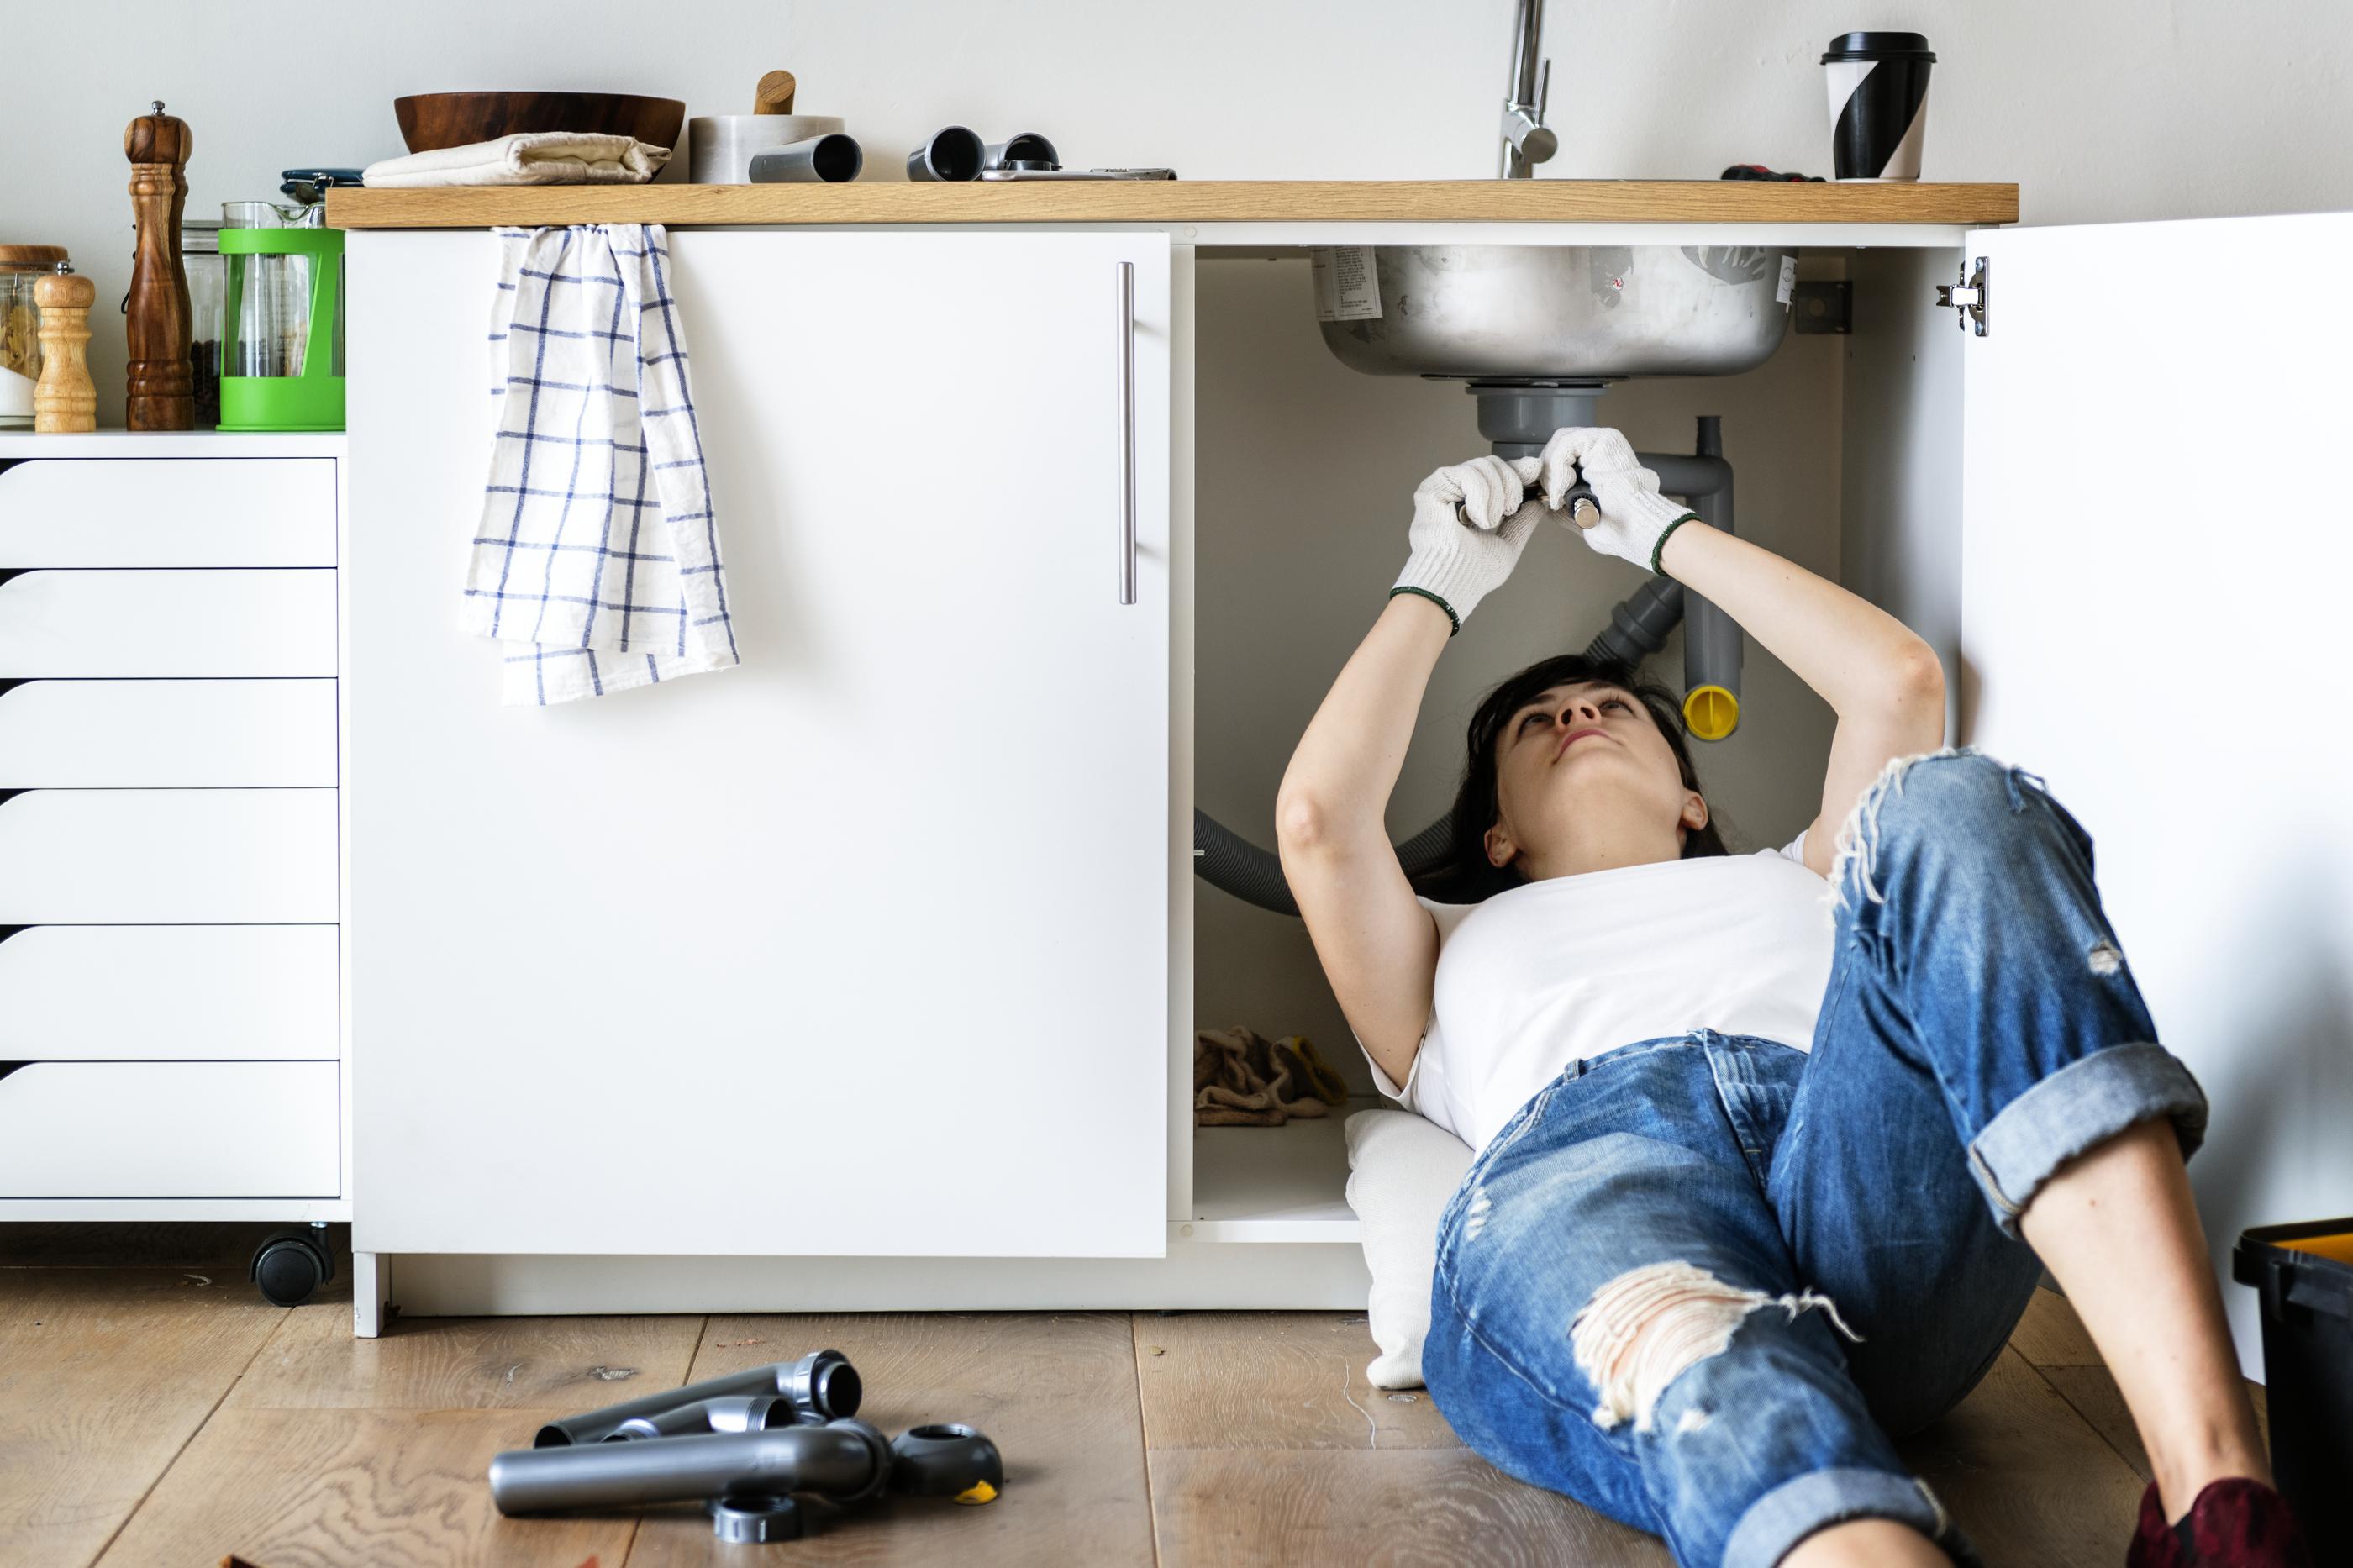 6 Plumbing Mistakes to Avoid When Remodeling Your House